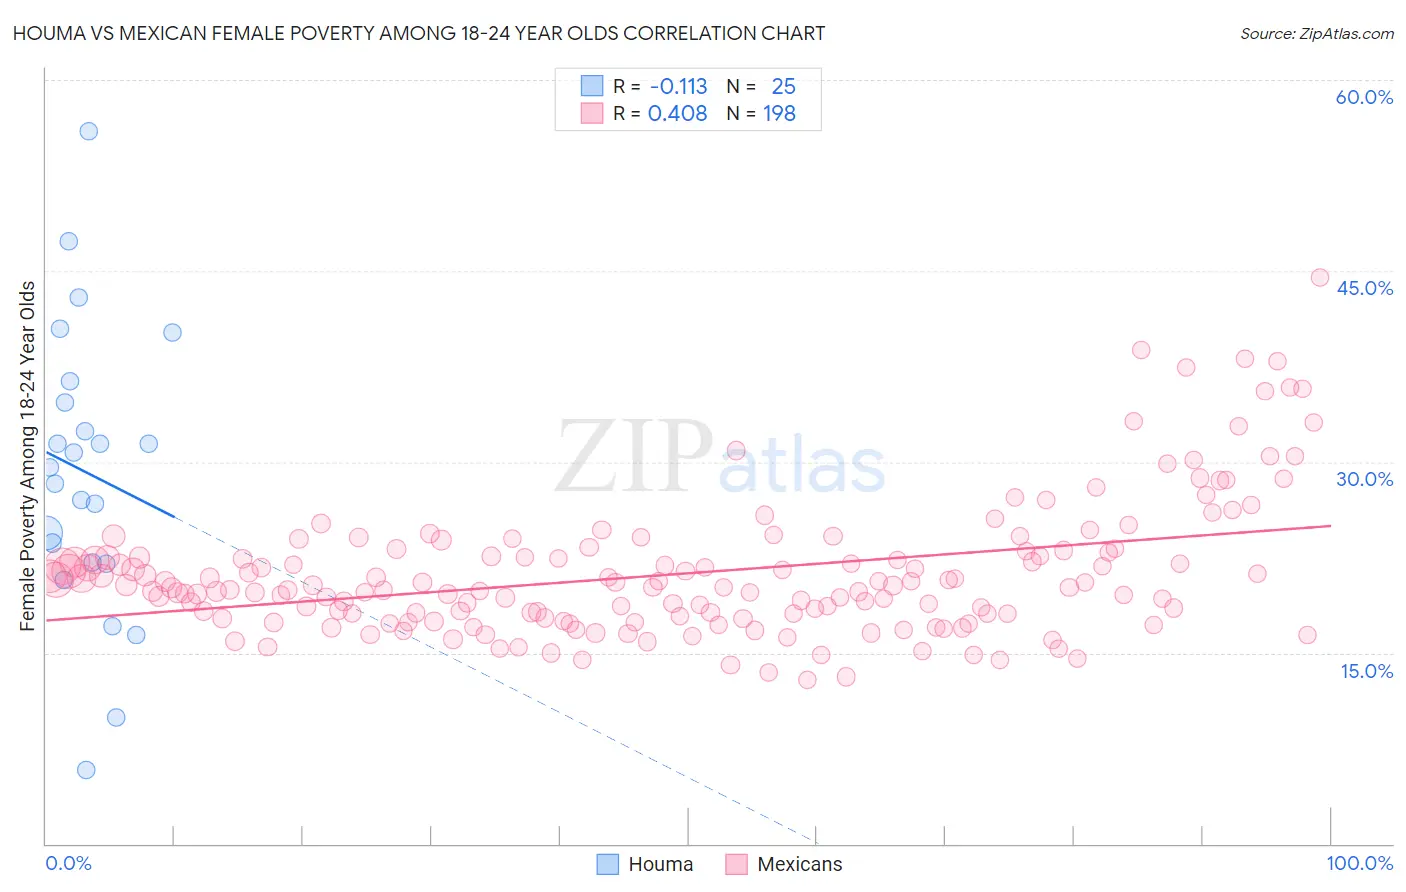 Houma vs Mexican Female Poverty Among 18-24 Year Olds